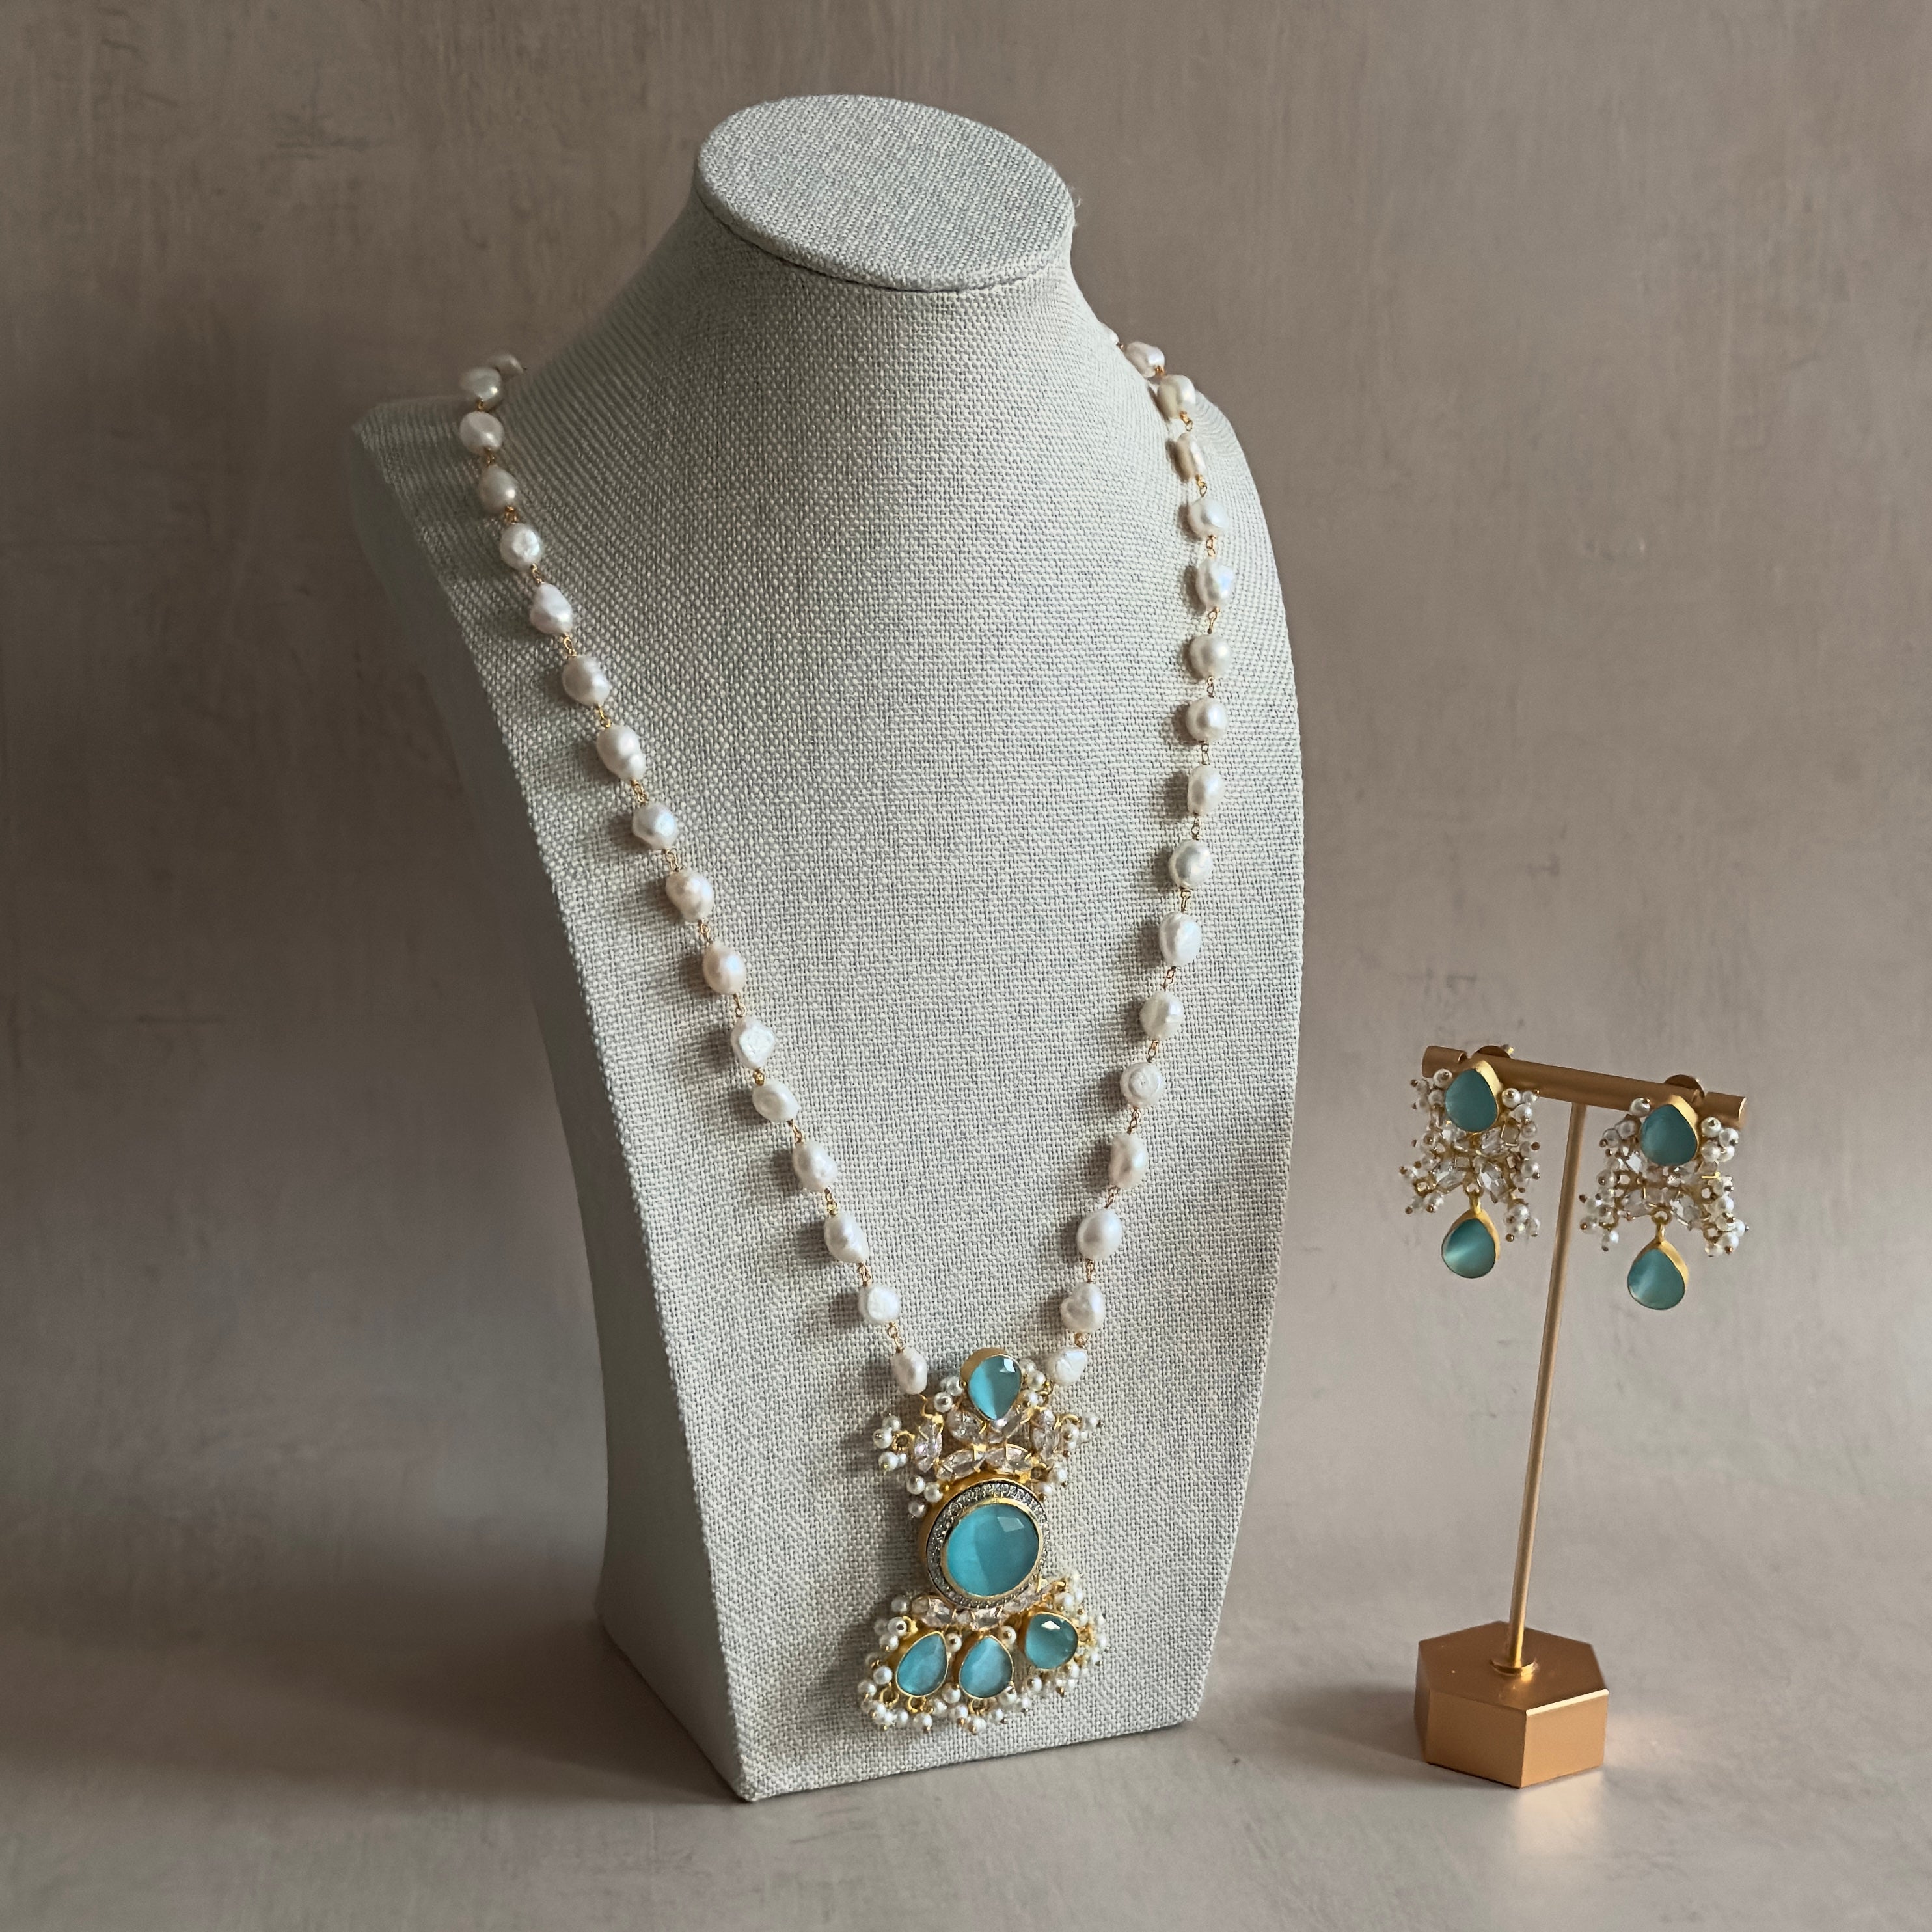 Elevate your style with our Amelia Blue Mala Set! This stunning long necklace set features aqua blue stones and sparkling cz crystals that will catch everyone's eye. Complete with matching earrings, this set is perfect for any occasion. Add a touch of elegance to your ensemble.